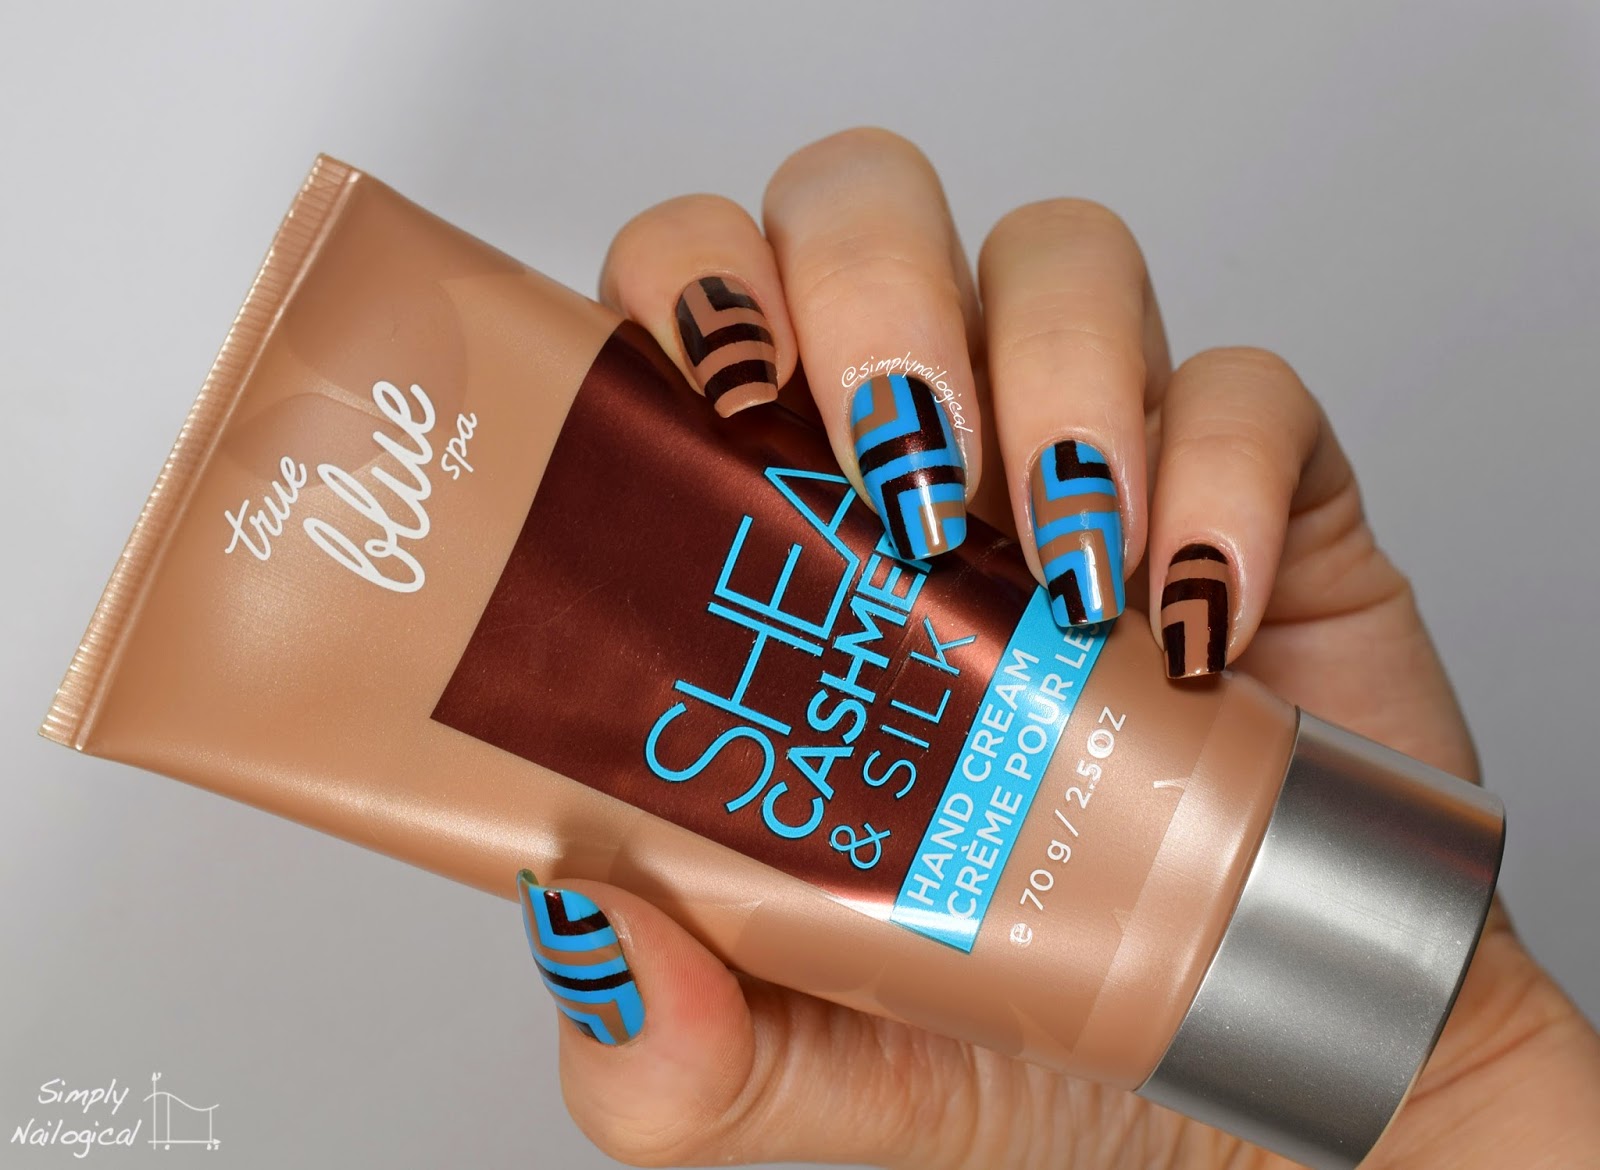 Right angle nails - Bath and Body Works